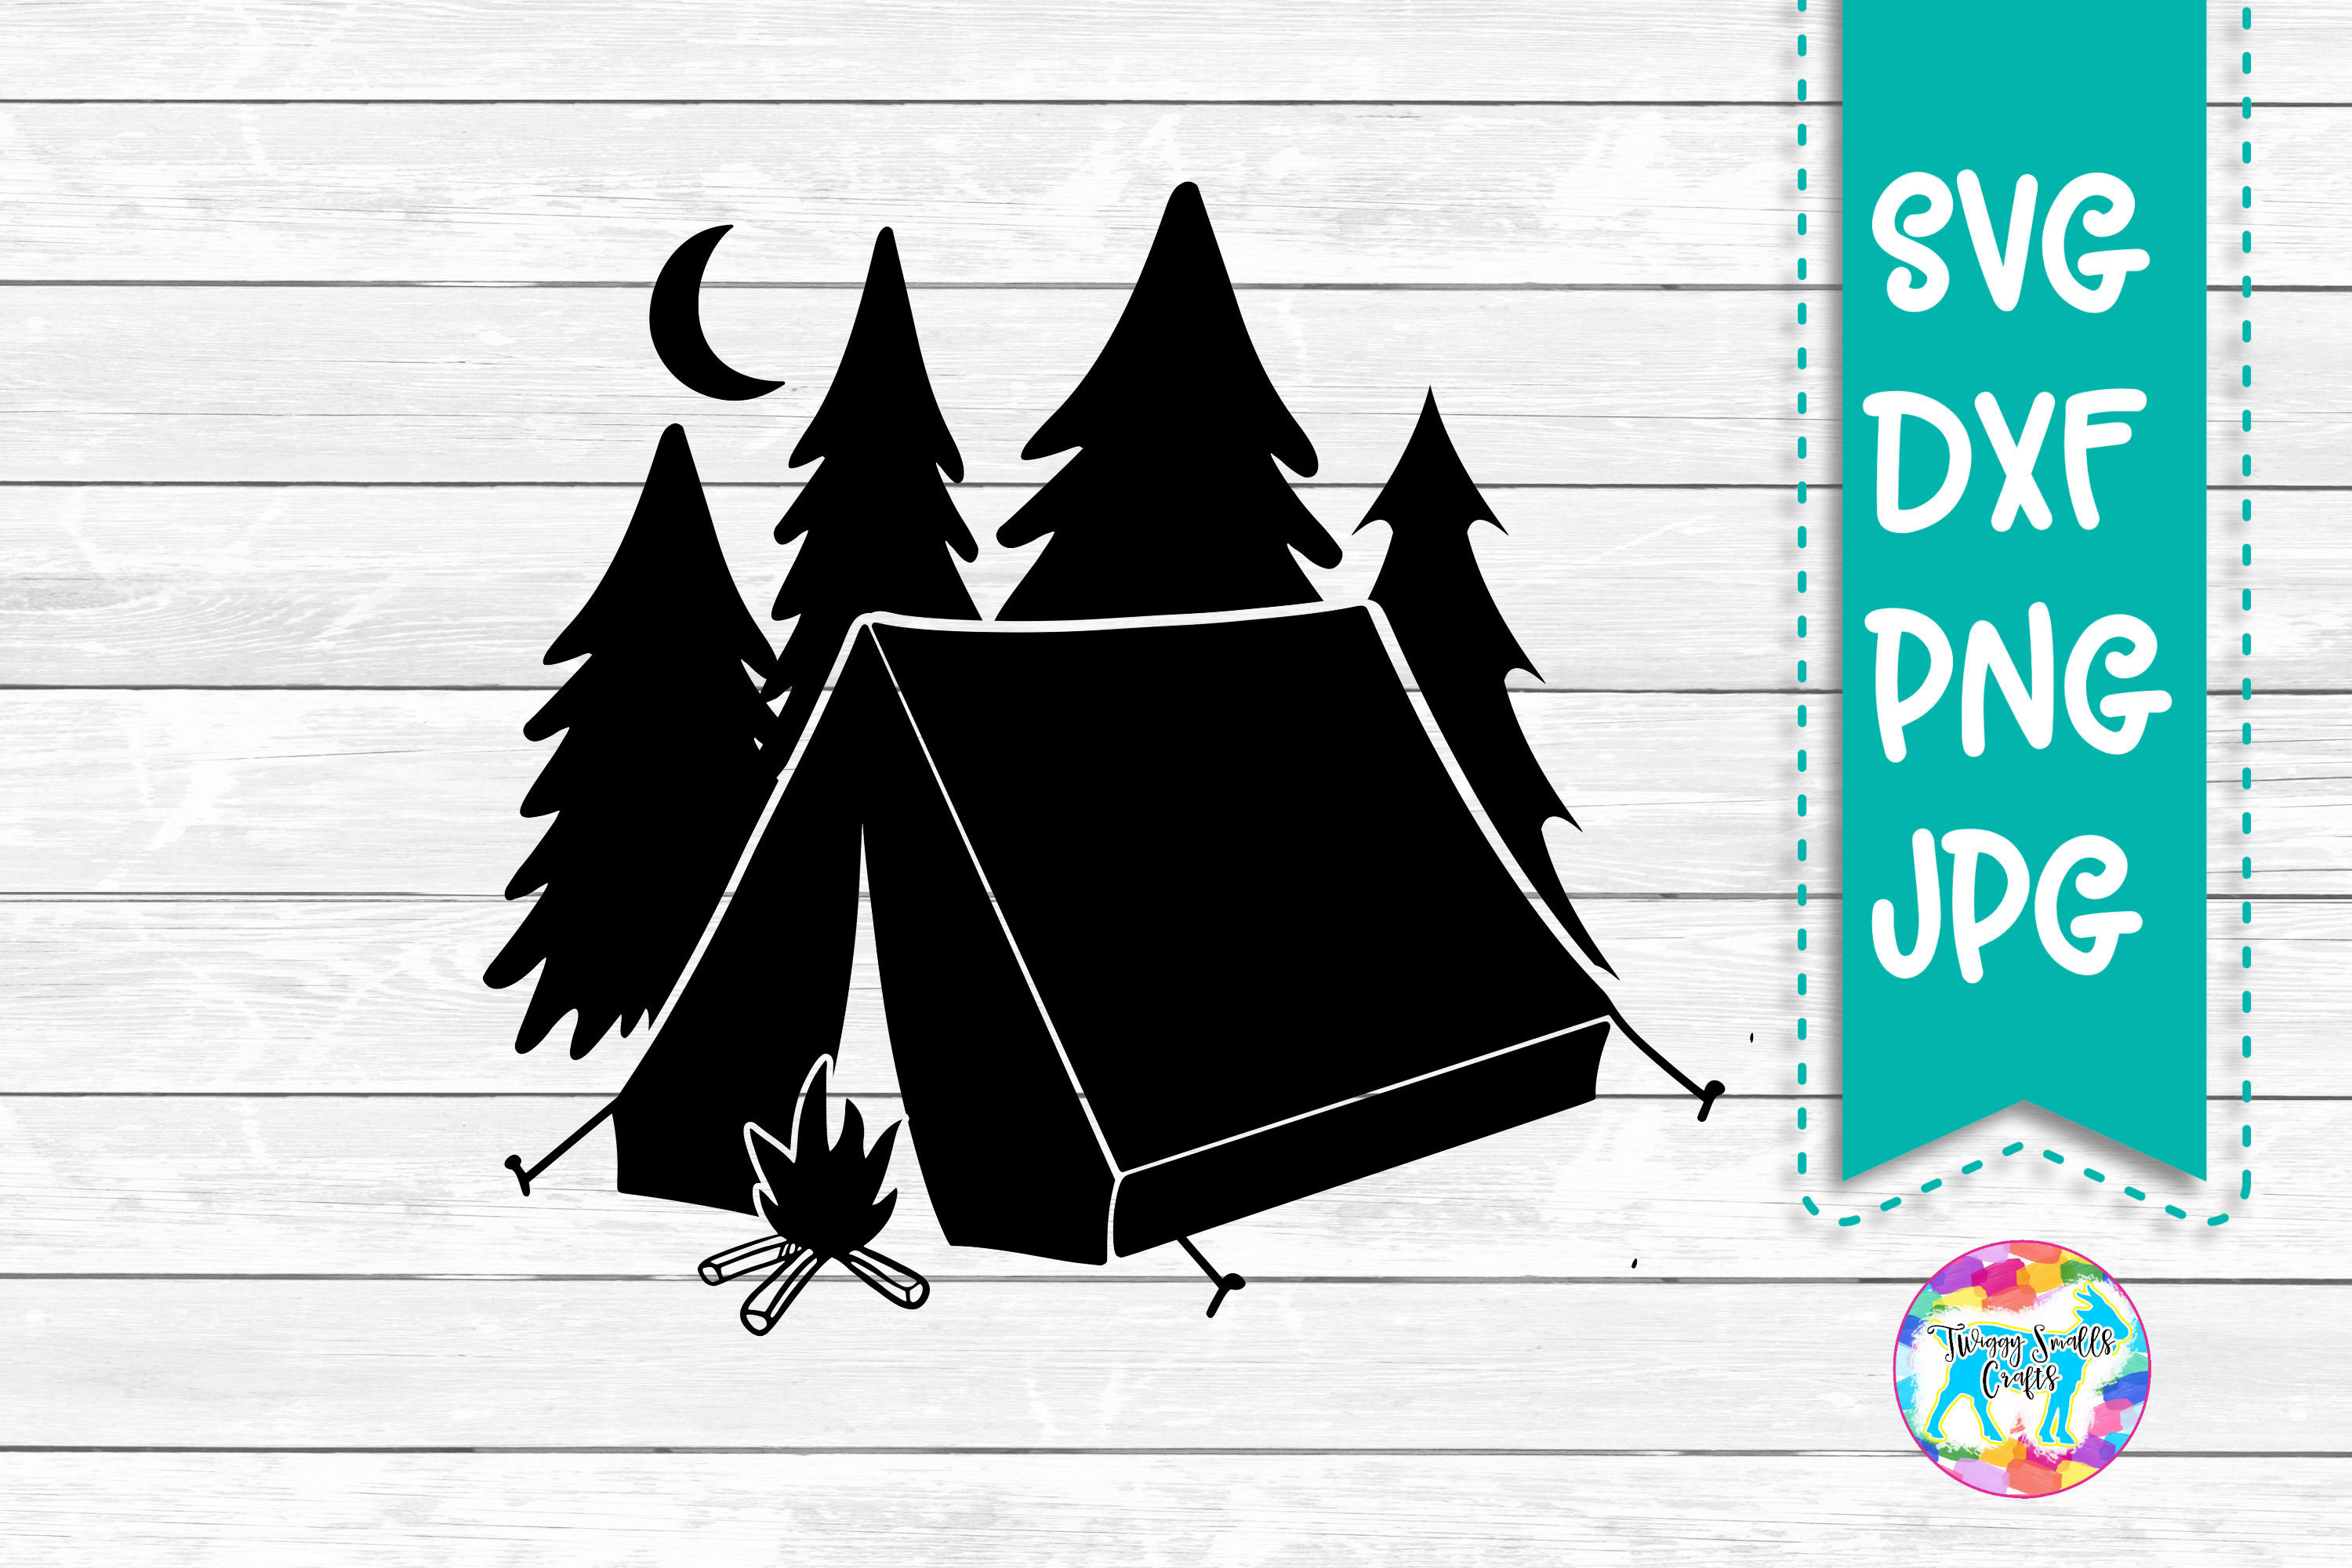 Camping Svg, Tent, Hiking, Camping, SVG, PNG, DXF, Files For, Silhouette,  Cricut, Cut Files, Cricut Explore, Cameo, Cute, Waterslide Design -   Canada